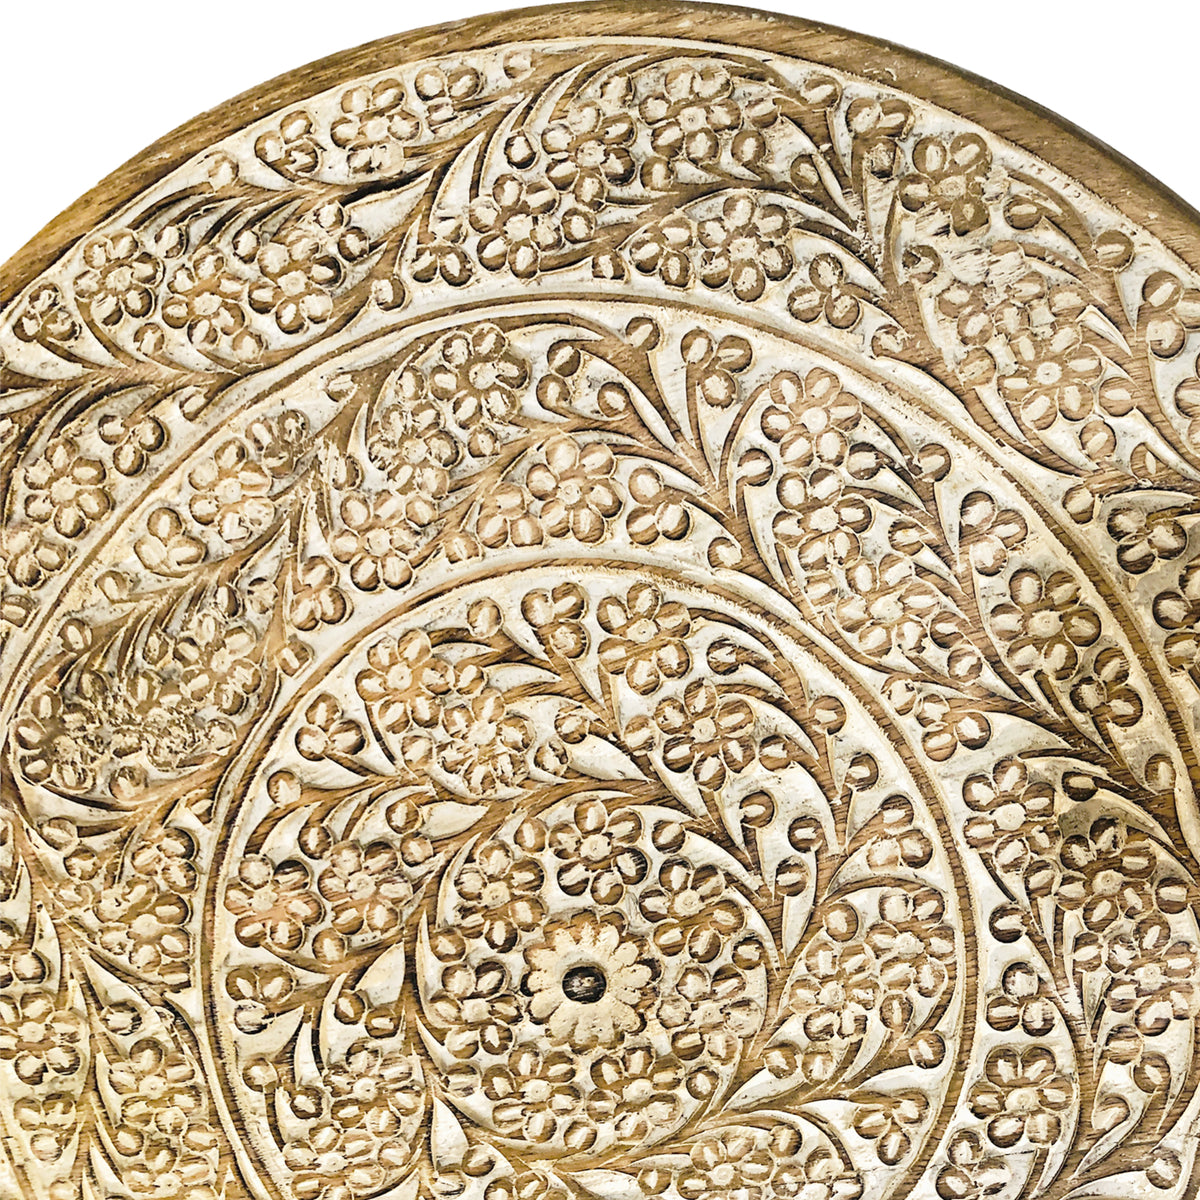 Round Mango Wood Decorative Carved Turntable Lazy Susan with Filigree Engraving, Brown - UPT-214884